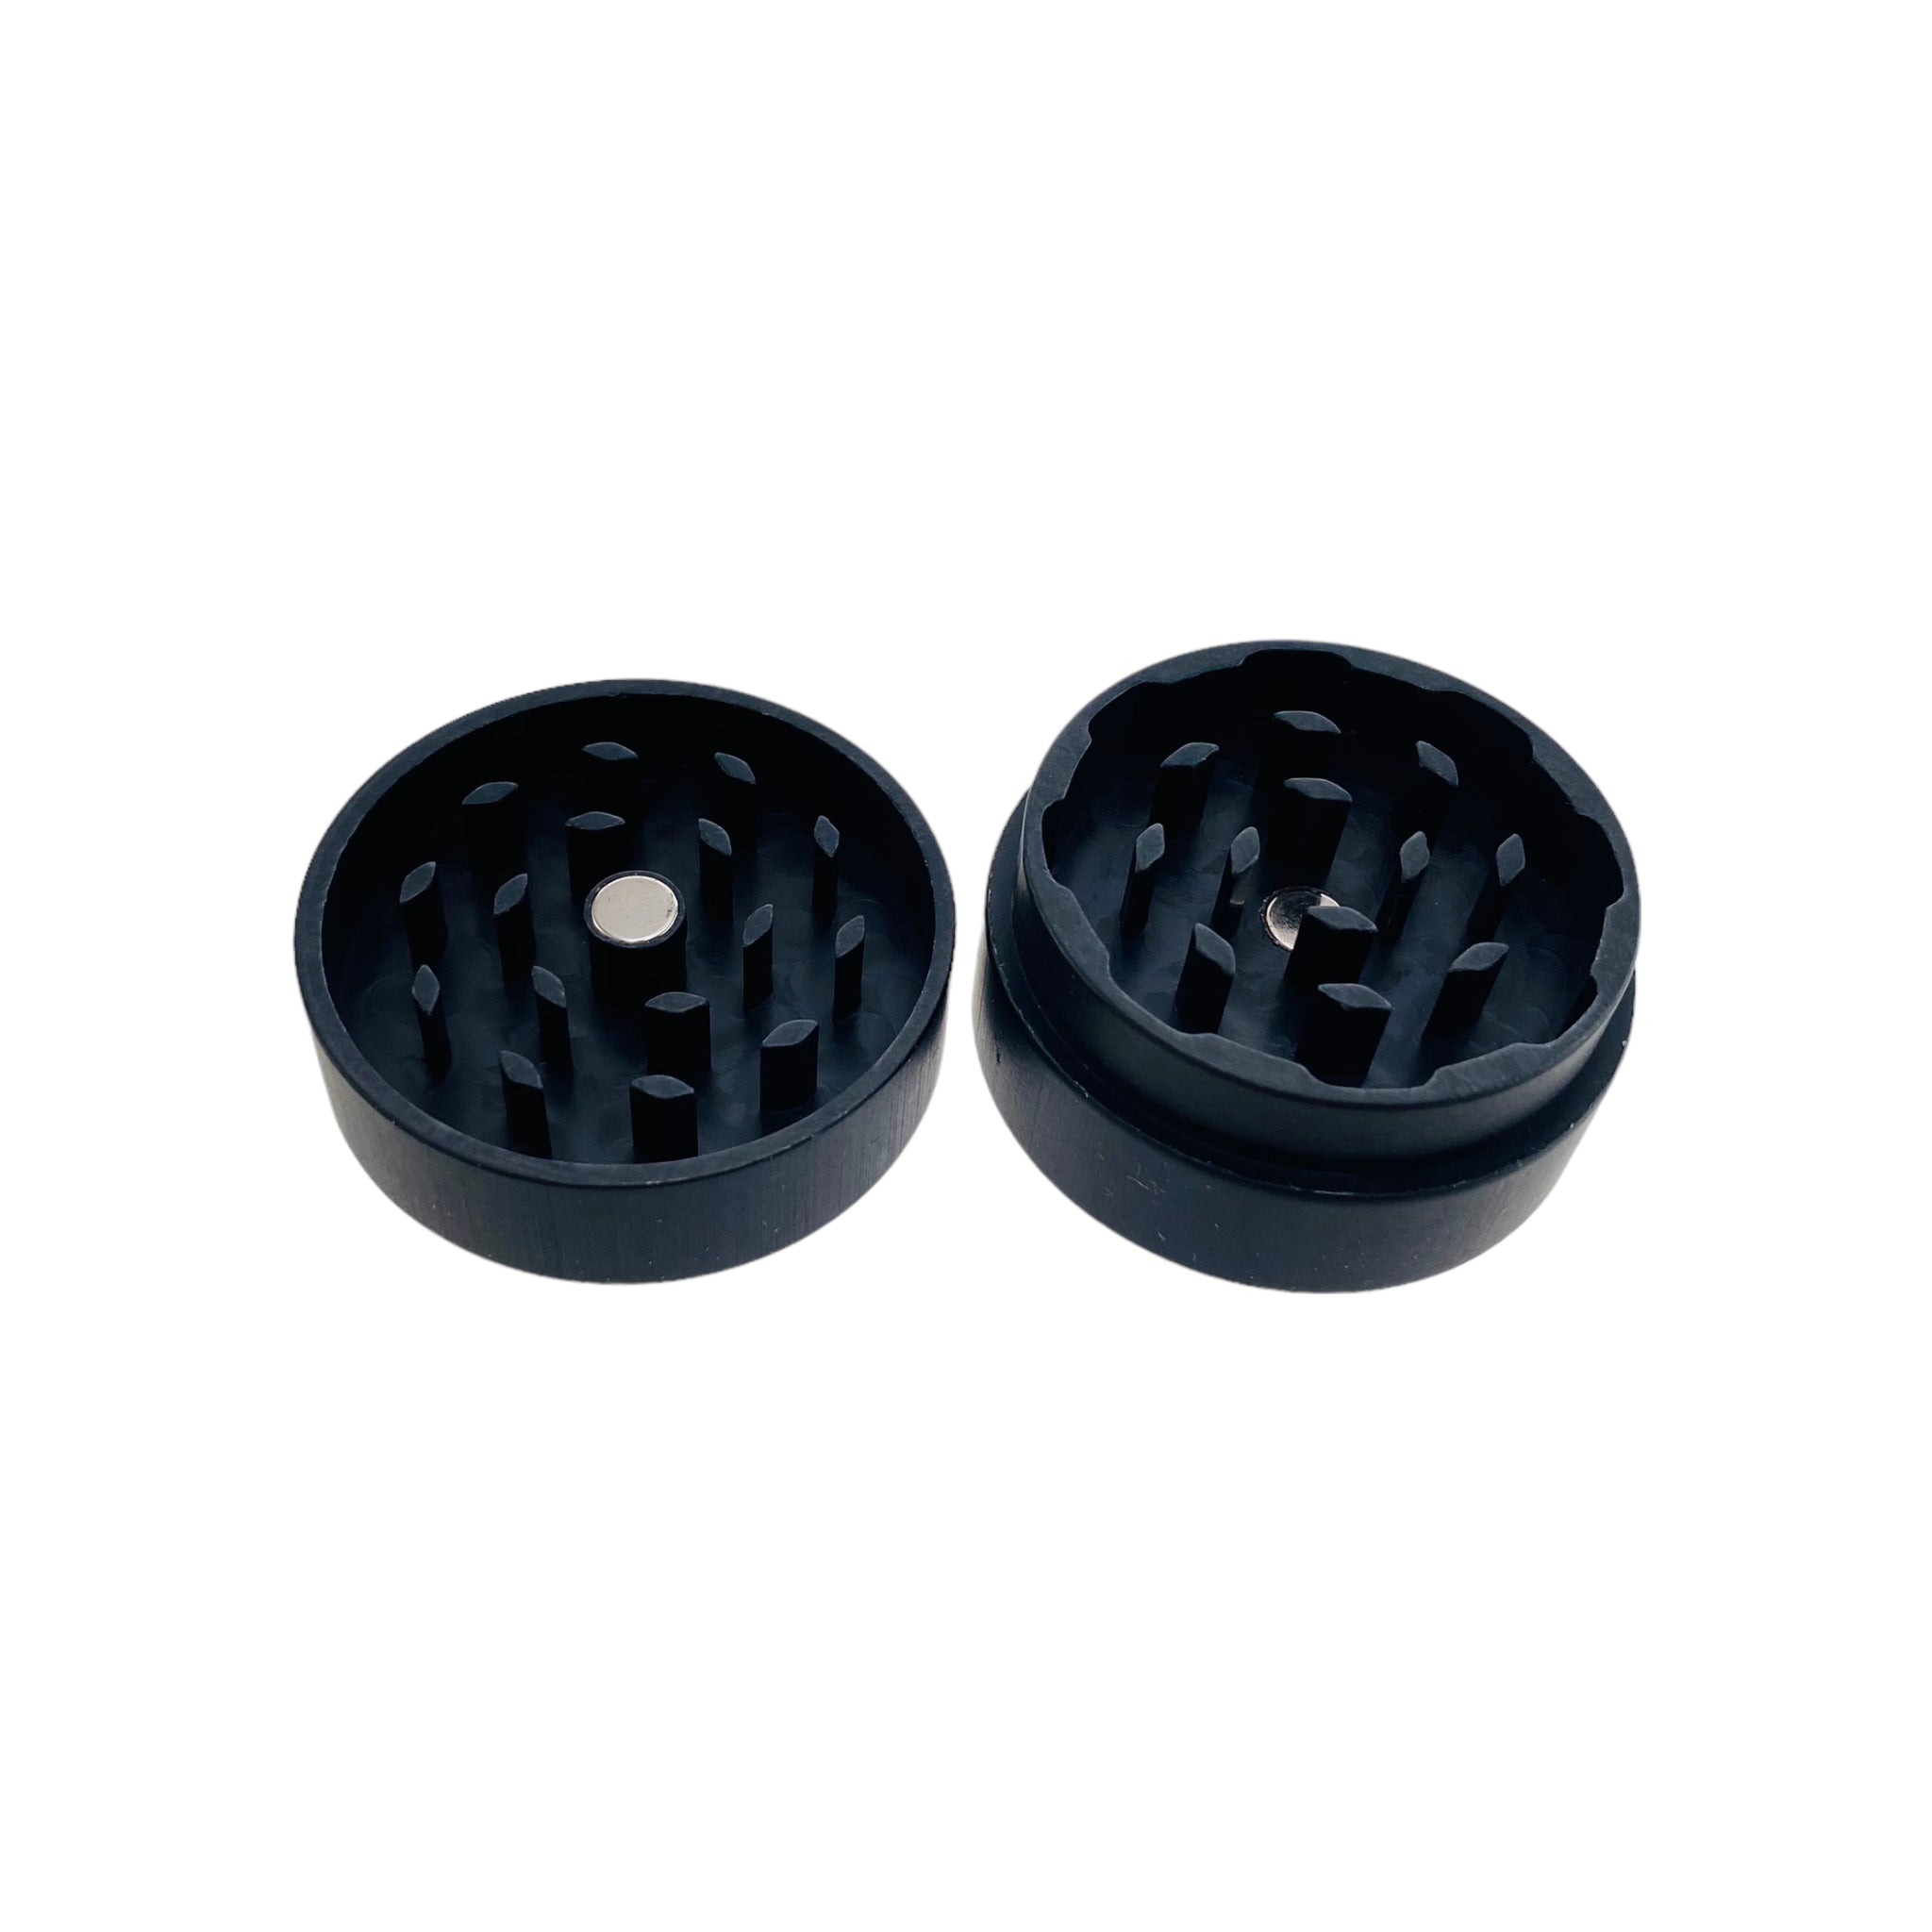 Tahoe Grinders Black Anodized Aluminum Small Two Piece Weed Grinder With Sacred Geometry